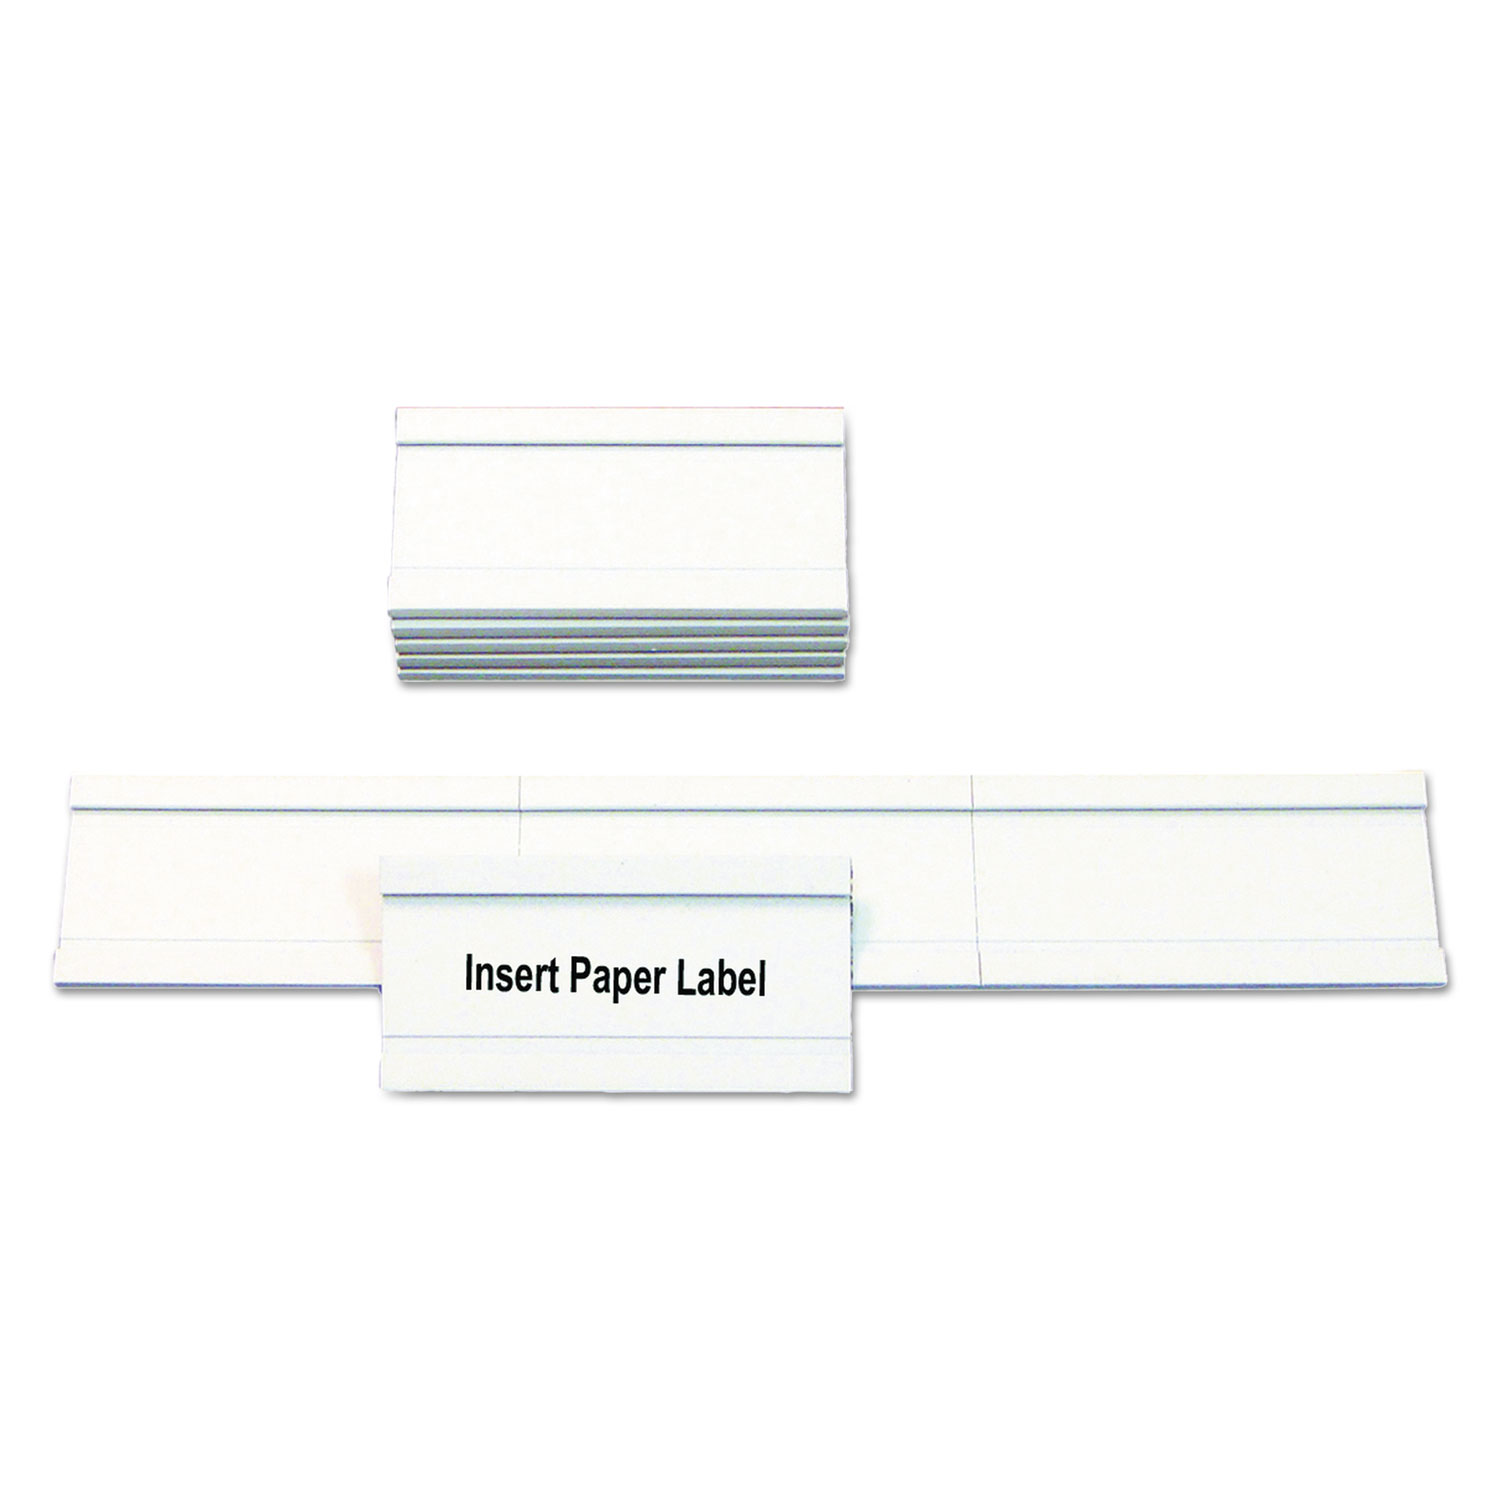 Magnetic Card Holders, 2w x 1h, White, 25/Pack